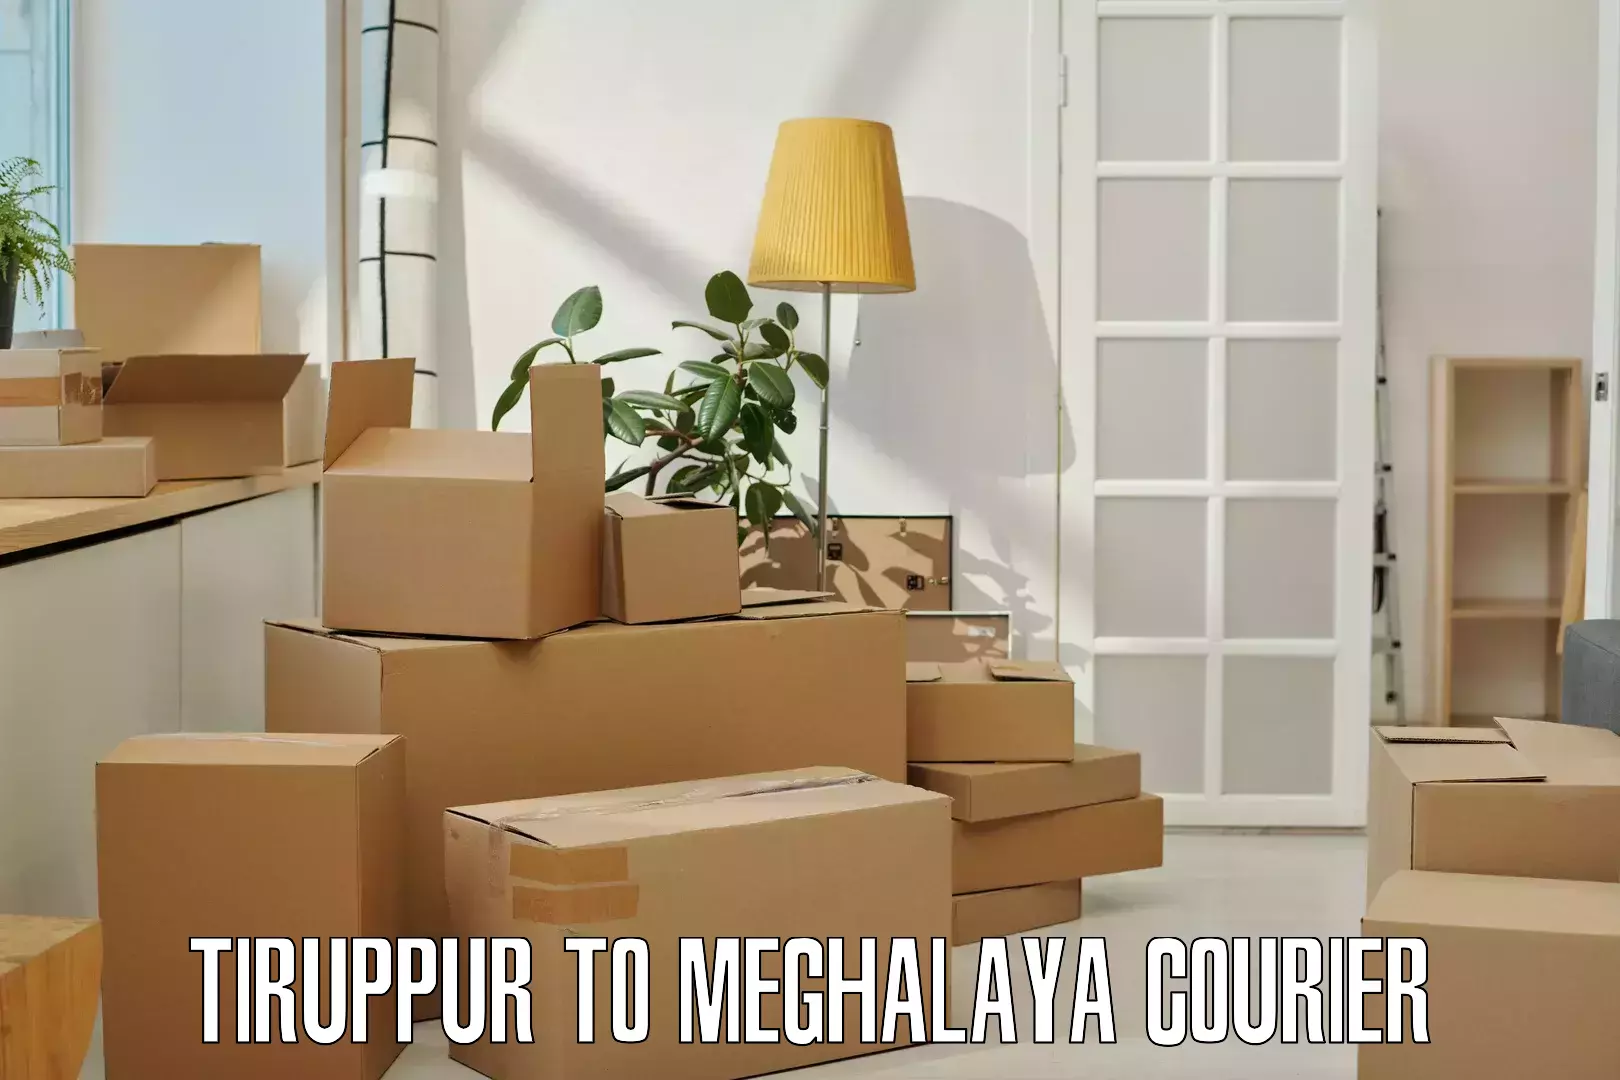 Affordable parcel service Tiruppur to Nongpoh